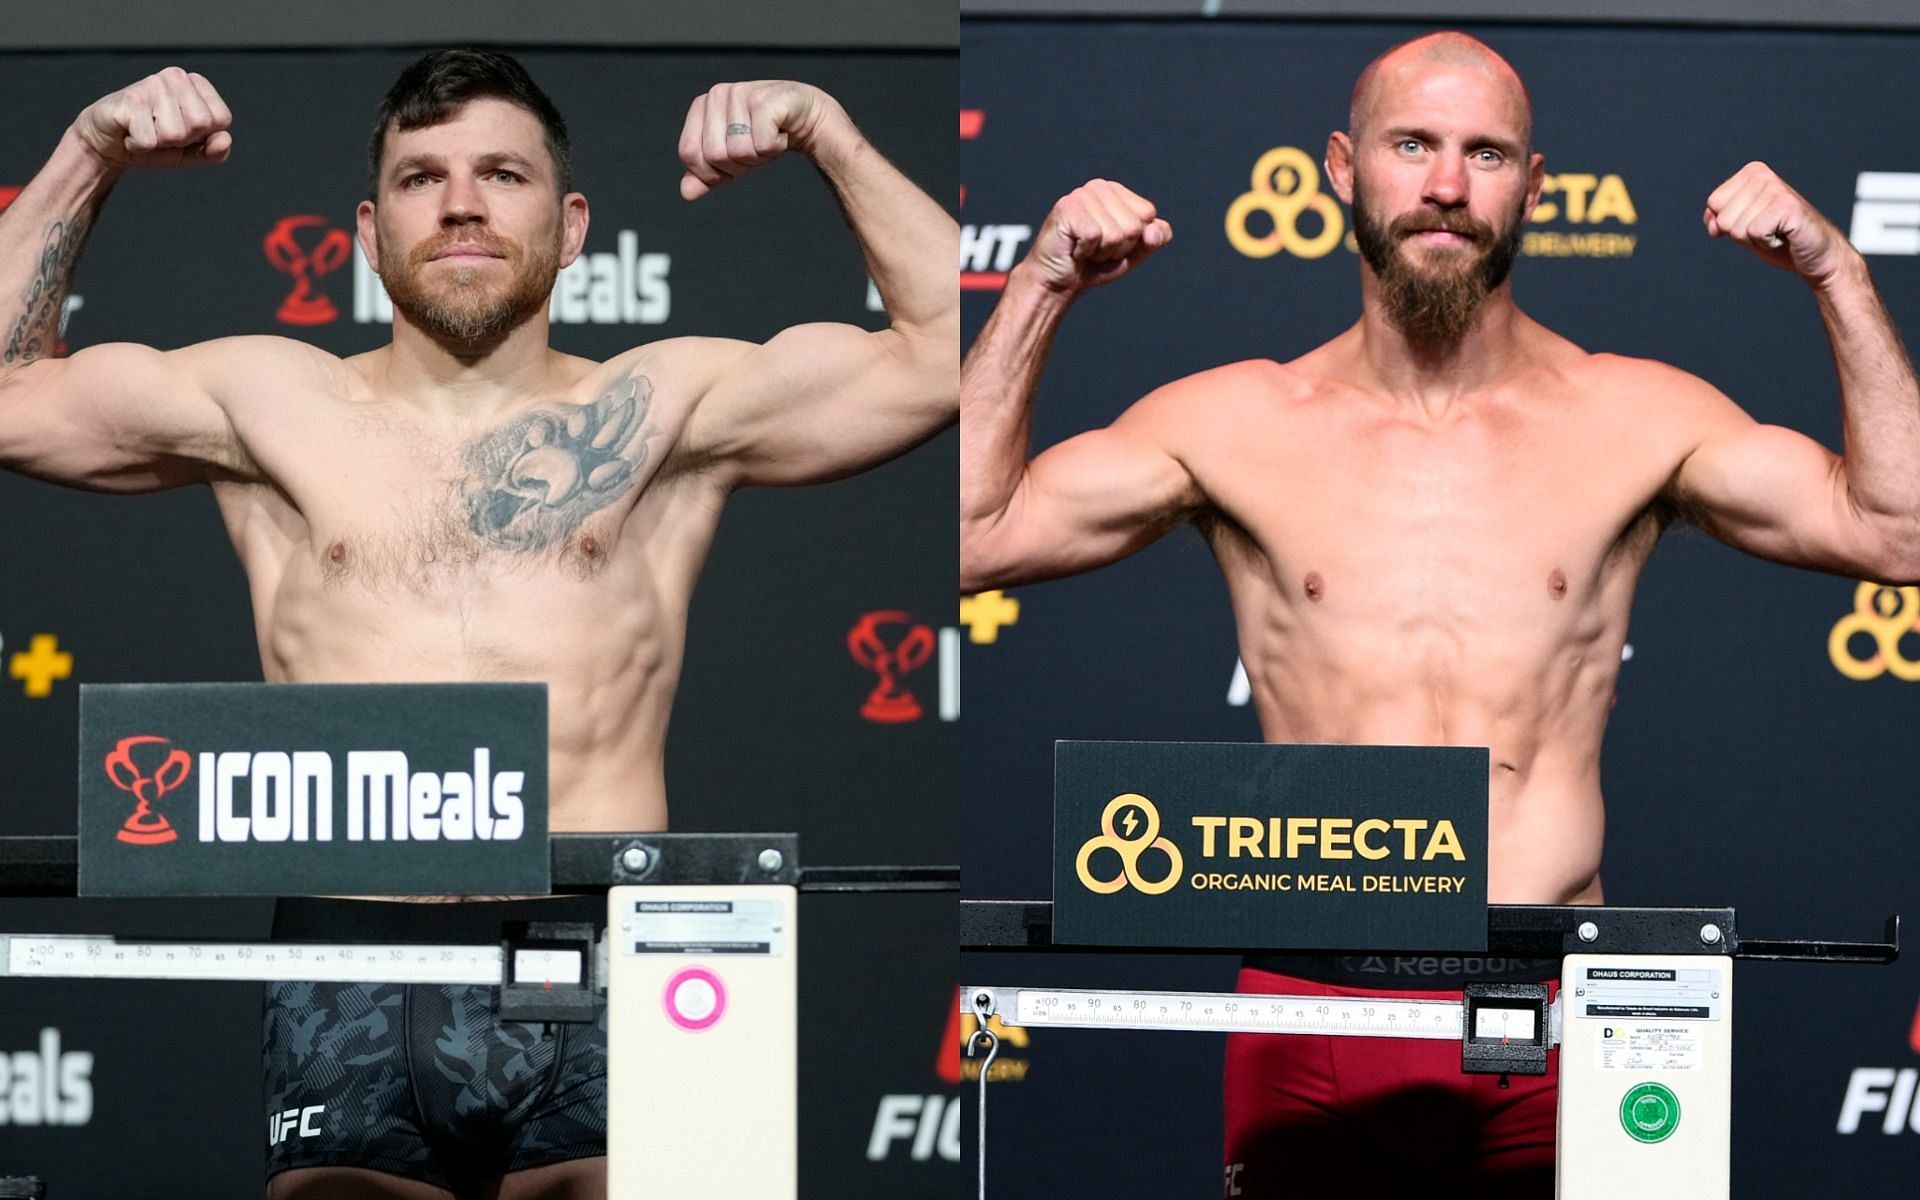 Jim Miller (left) and Donald Cerrone (right) at weigh-ins of different UFC events